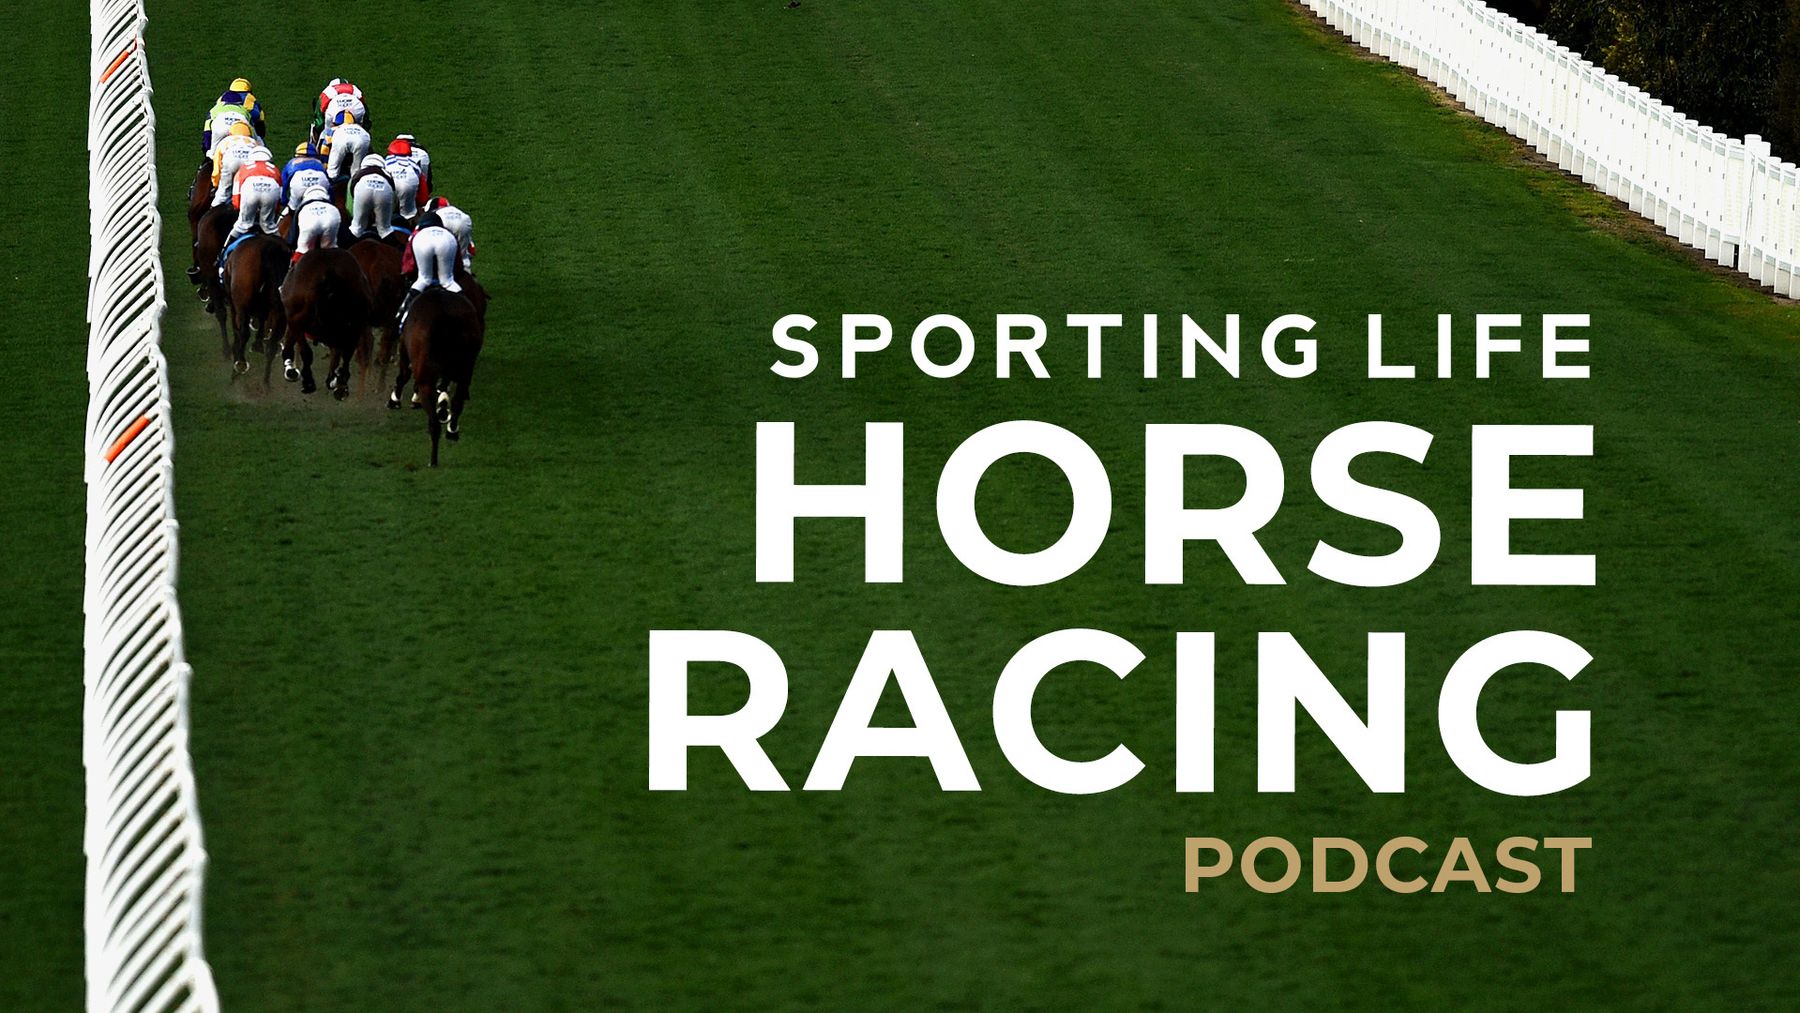 sporting life horse racing tips